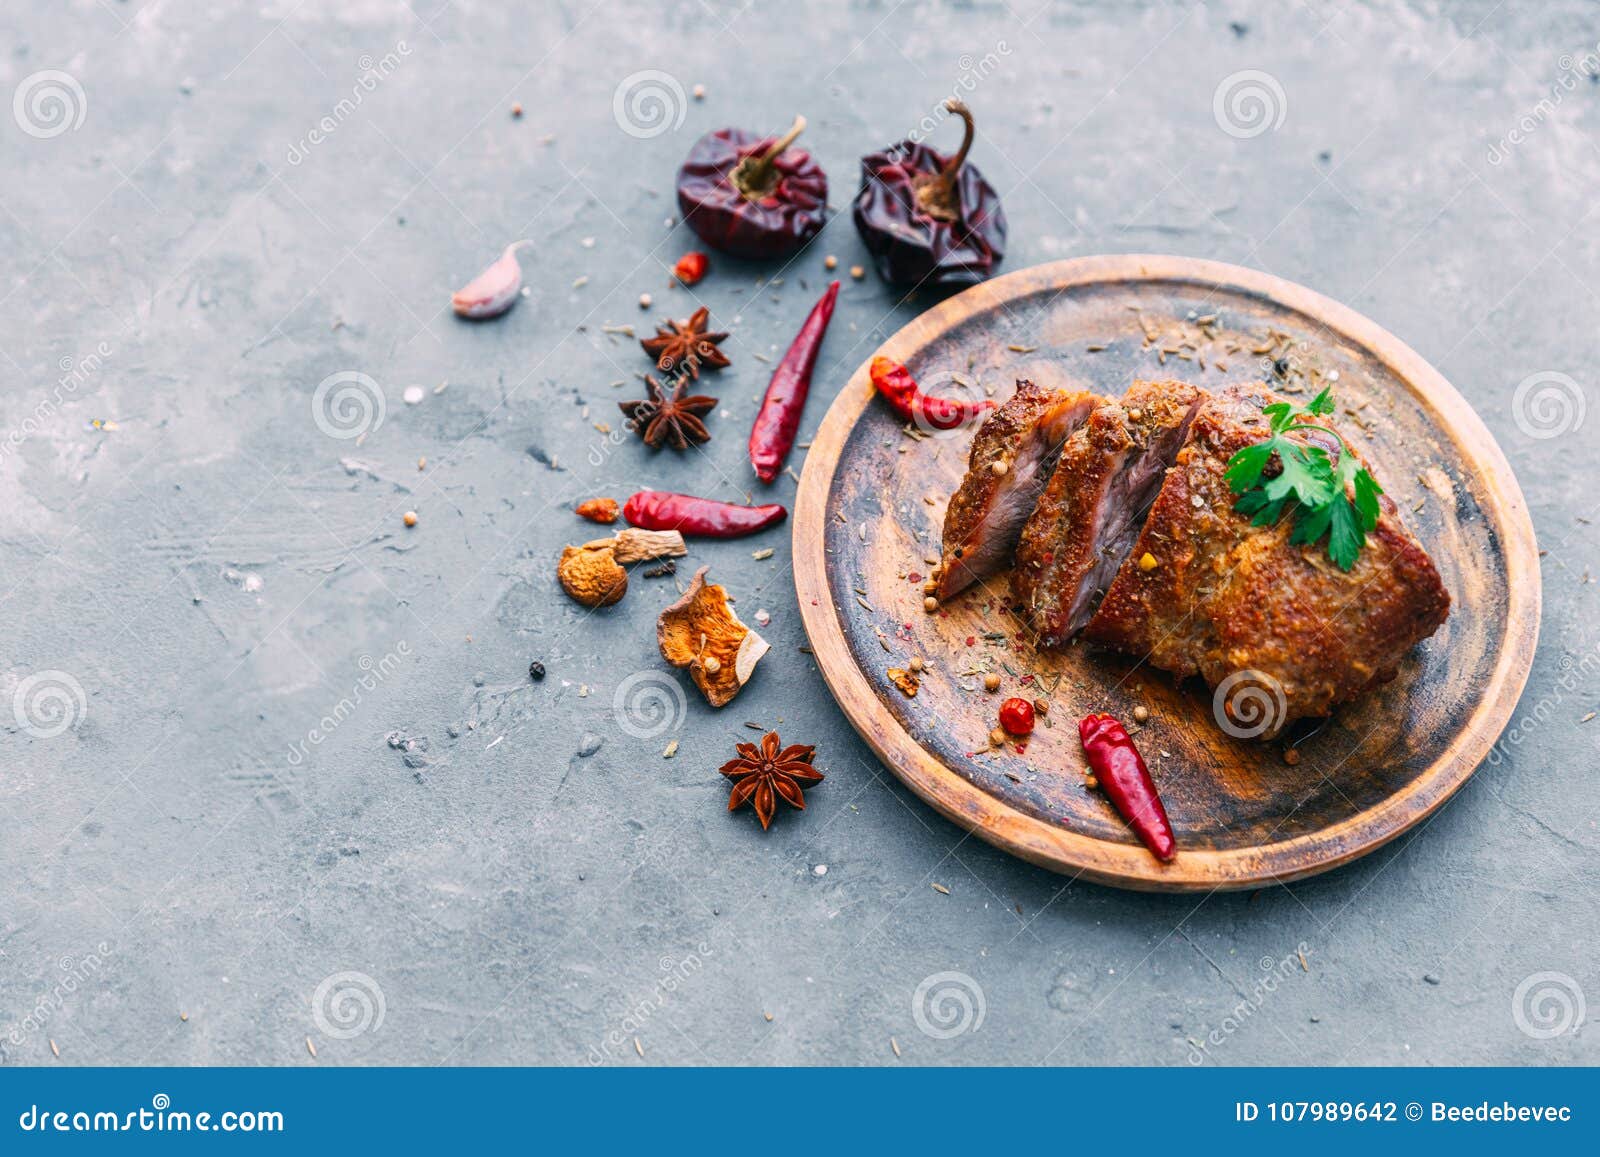 slices of beef steak with spices on blue table